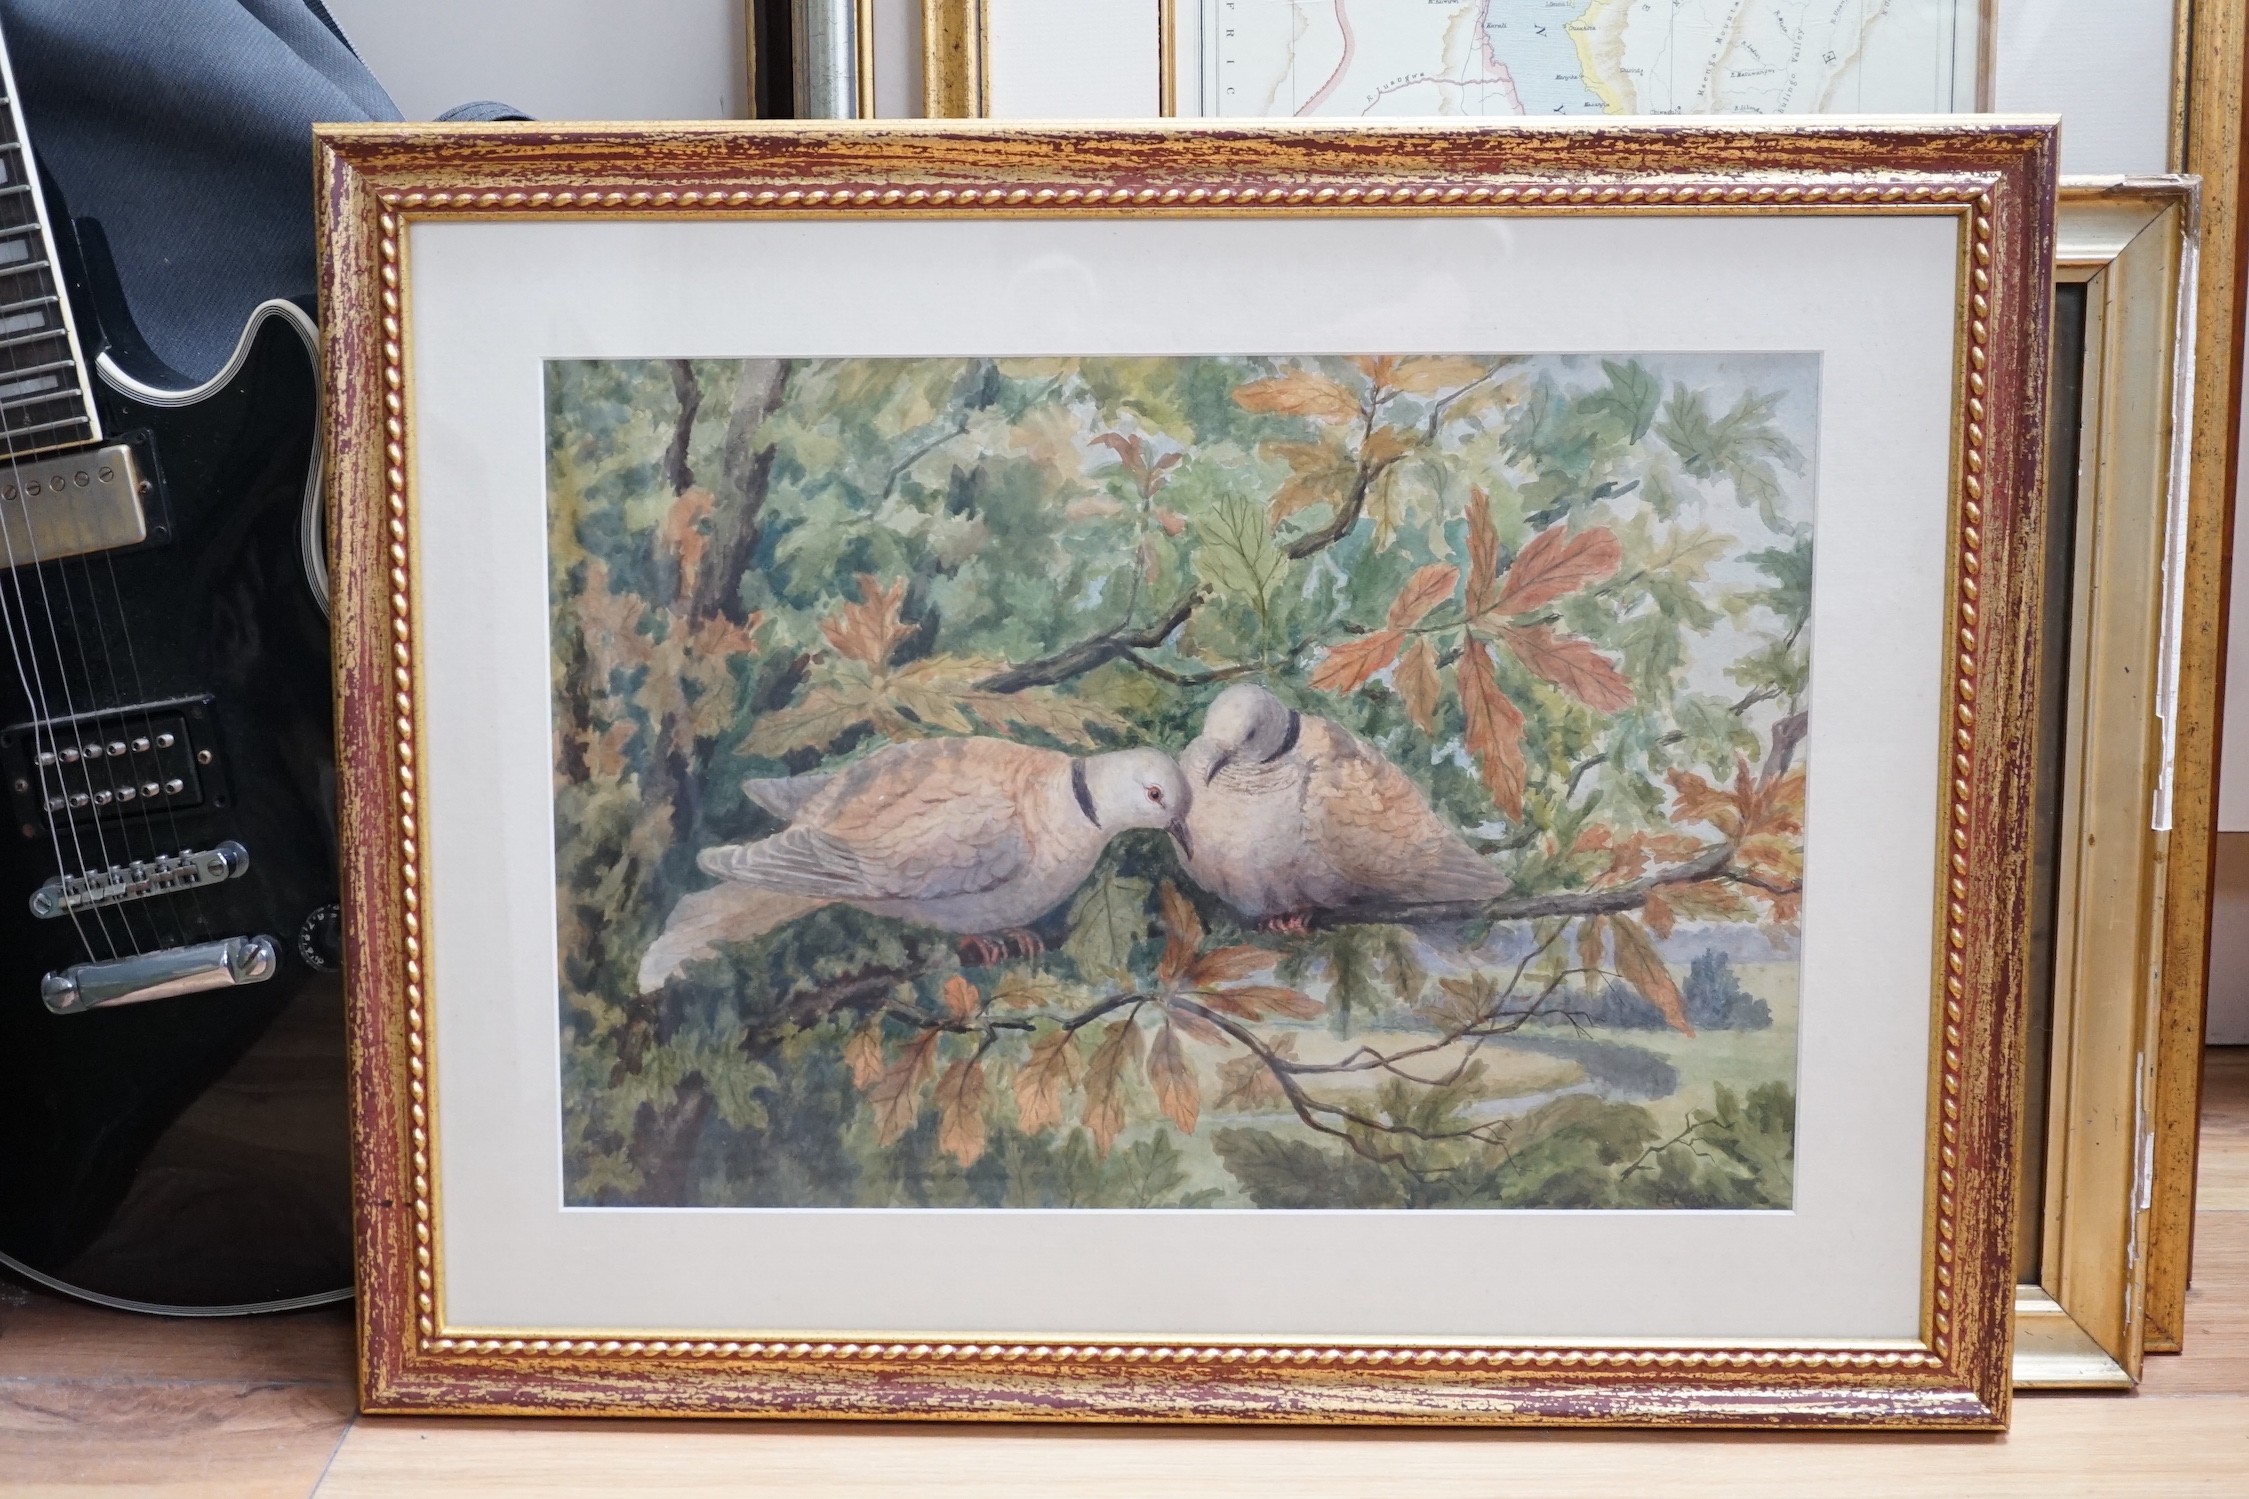 Parker Hagarty (1854-1934), watercolour, River landscape, signed, 25 x 34cm, and two watercolours, a still life of fruit and a study of doves by Edith Cottam (Exh.1886-1892), signed and dated 1892, 32 x 46cm